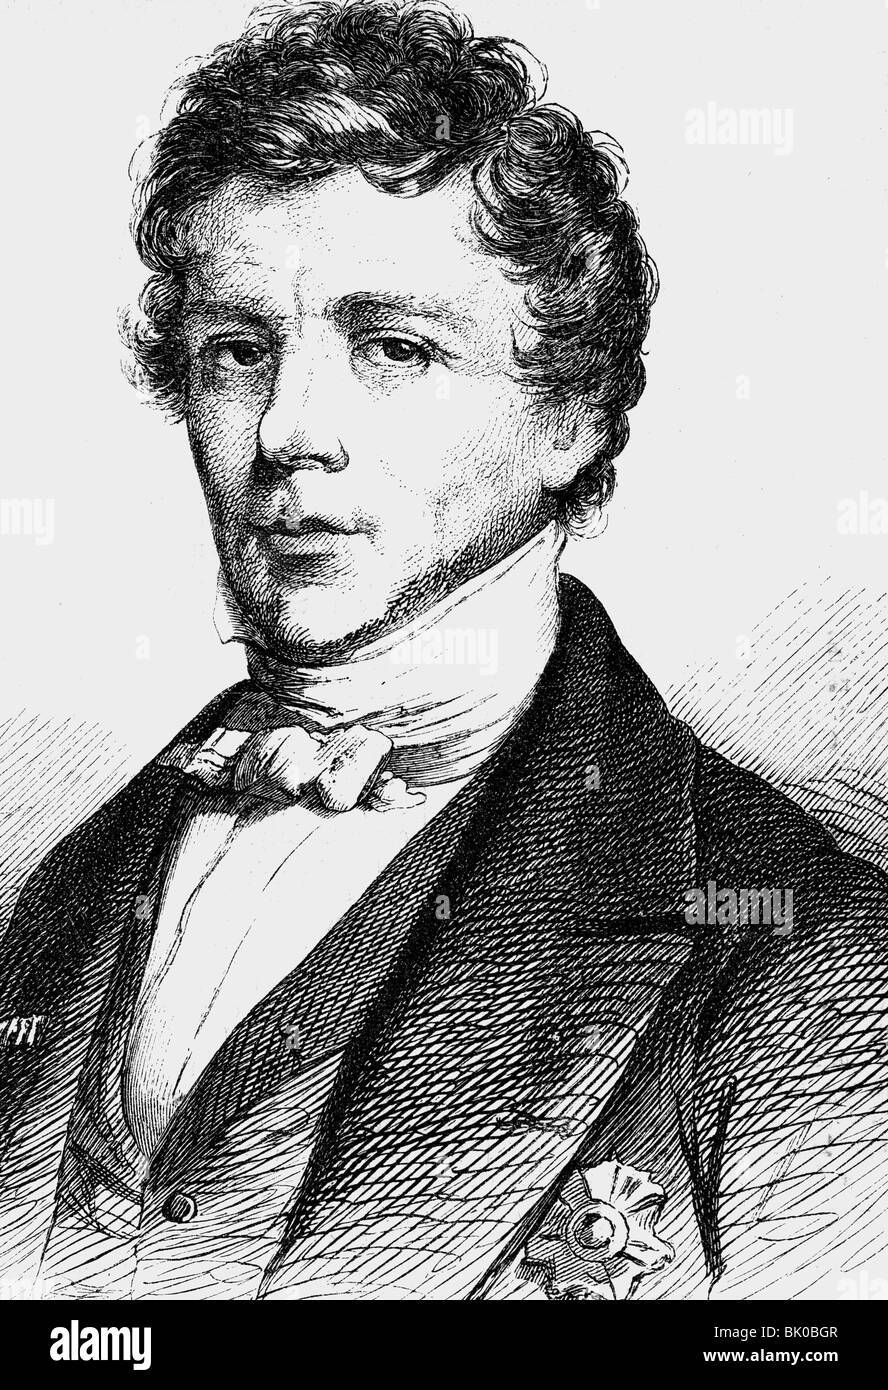 Rogier, Charles, 16.8.1800 - 27.5.1885, Belgian politician (Lib.), Prime Minster 30.10.1832 - 4.8.1834, 12.8.1847 - 31.10.1852 and 9.11.1857 - 3.1.1860, portrait, wood engraving, 19th century, , Stock Photo